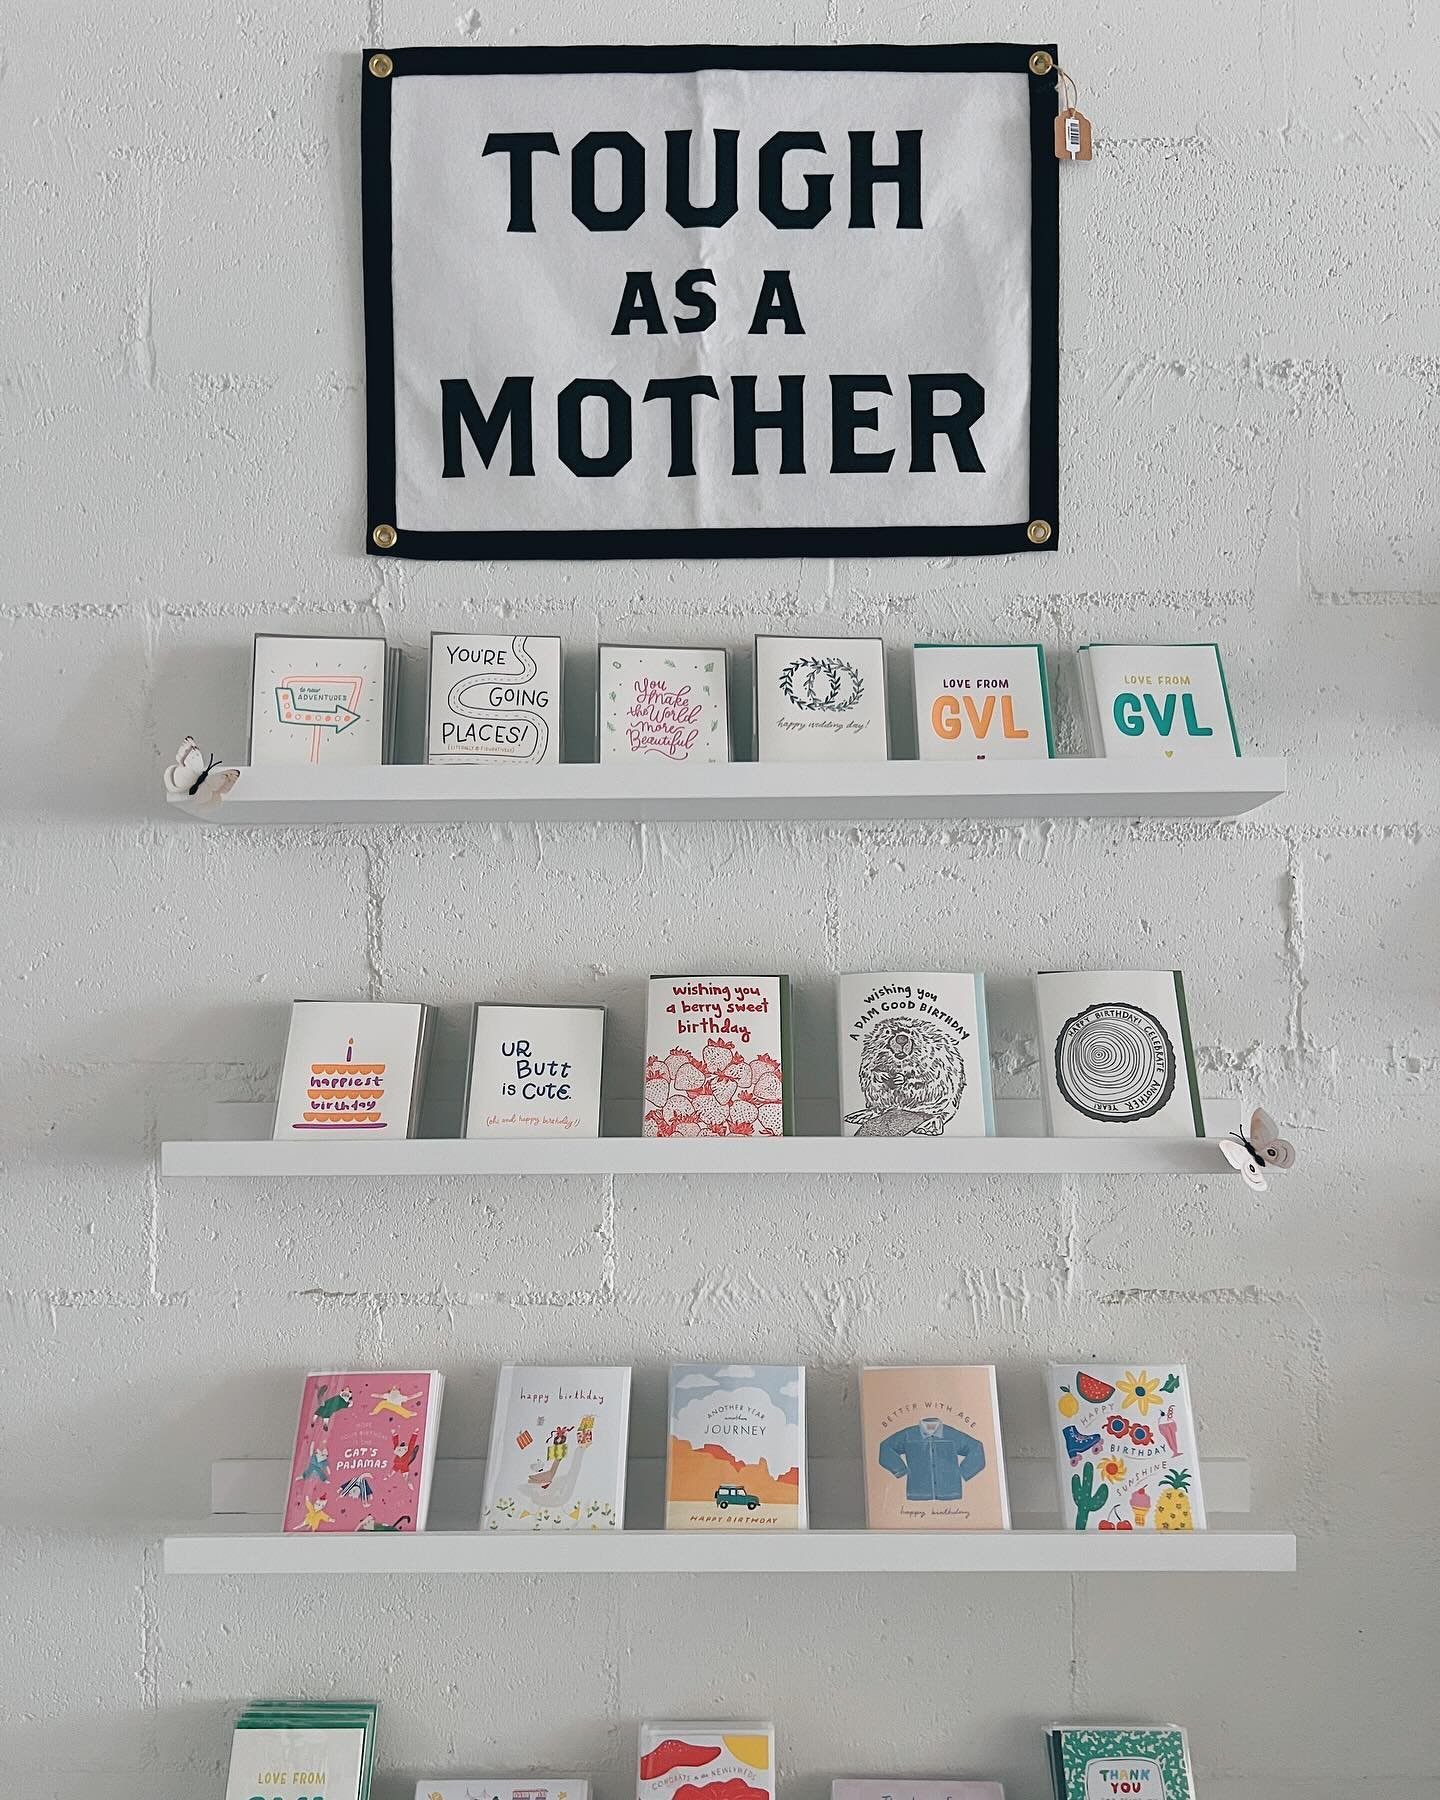 Today is the perfect day to come shop for mom! We&rsquo;ve got cards, jewelry, treats, and so much more. Open for our LAST WEEKEND, come shop 11am -5pm!

ALL THE DETAILS
🌷The Spring Pop Up Shop will be open weekends from April 19 - May 12. Shop Frid